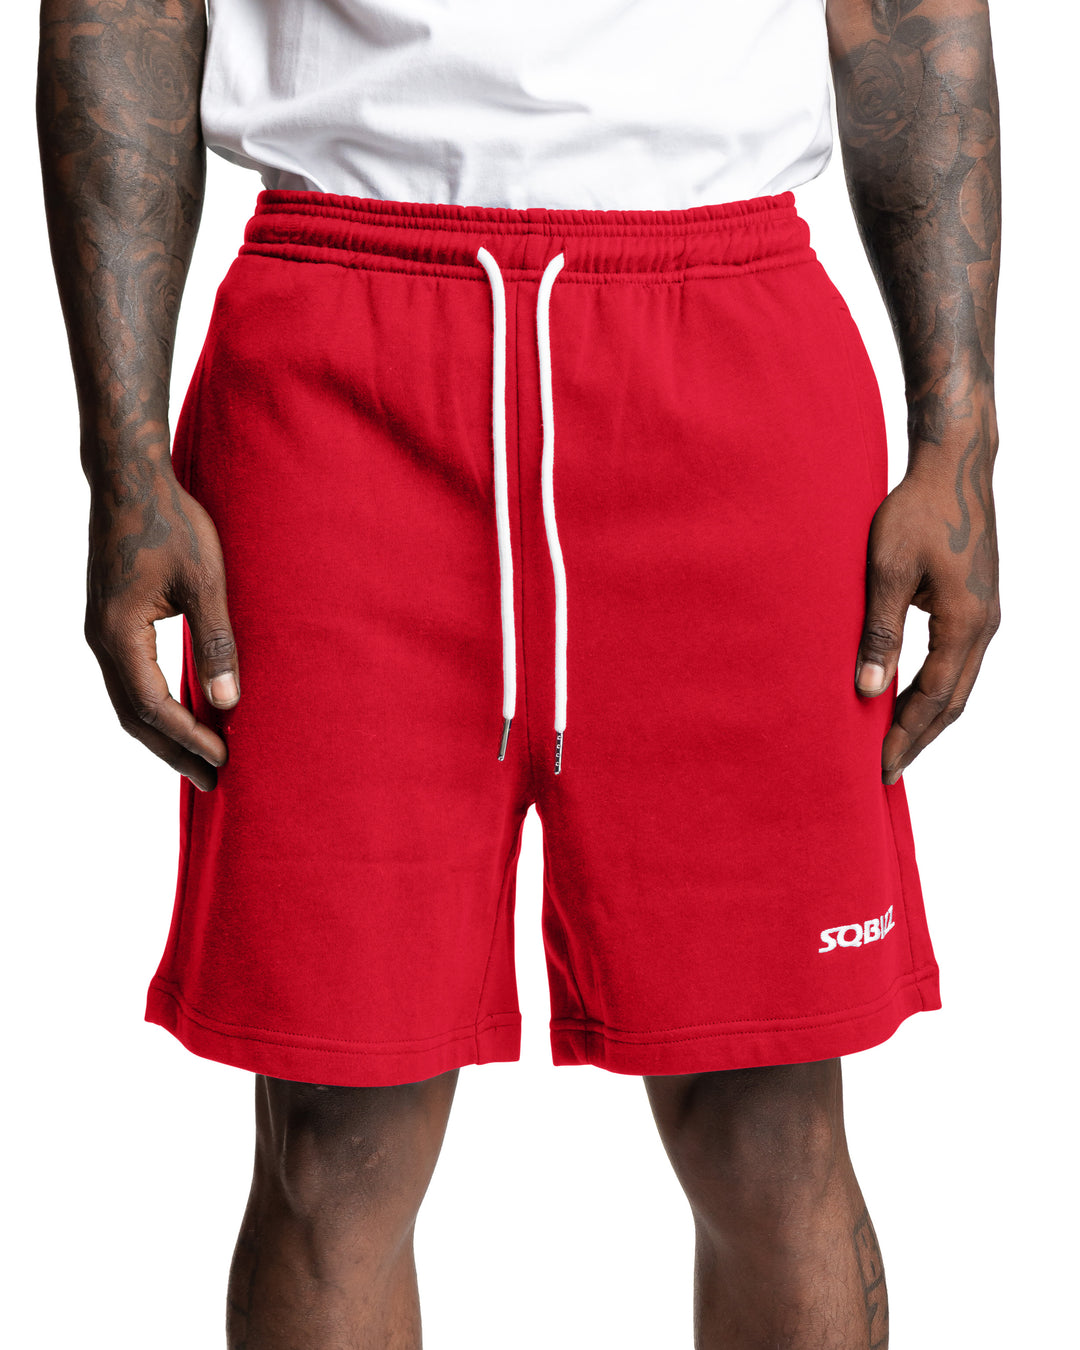 Centre Shorts in Red/White